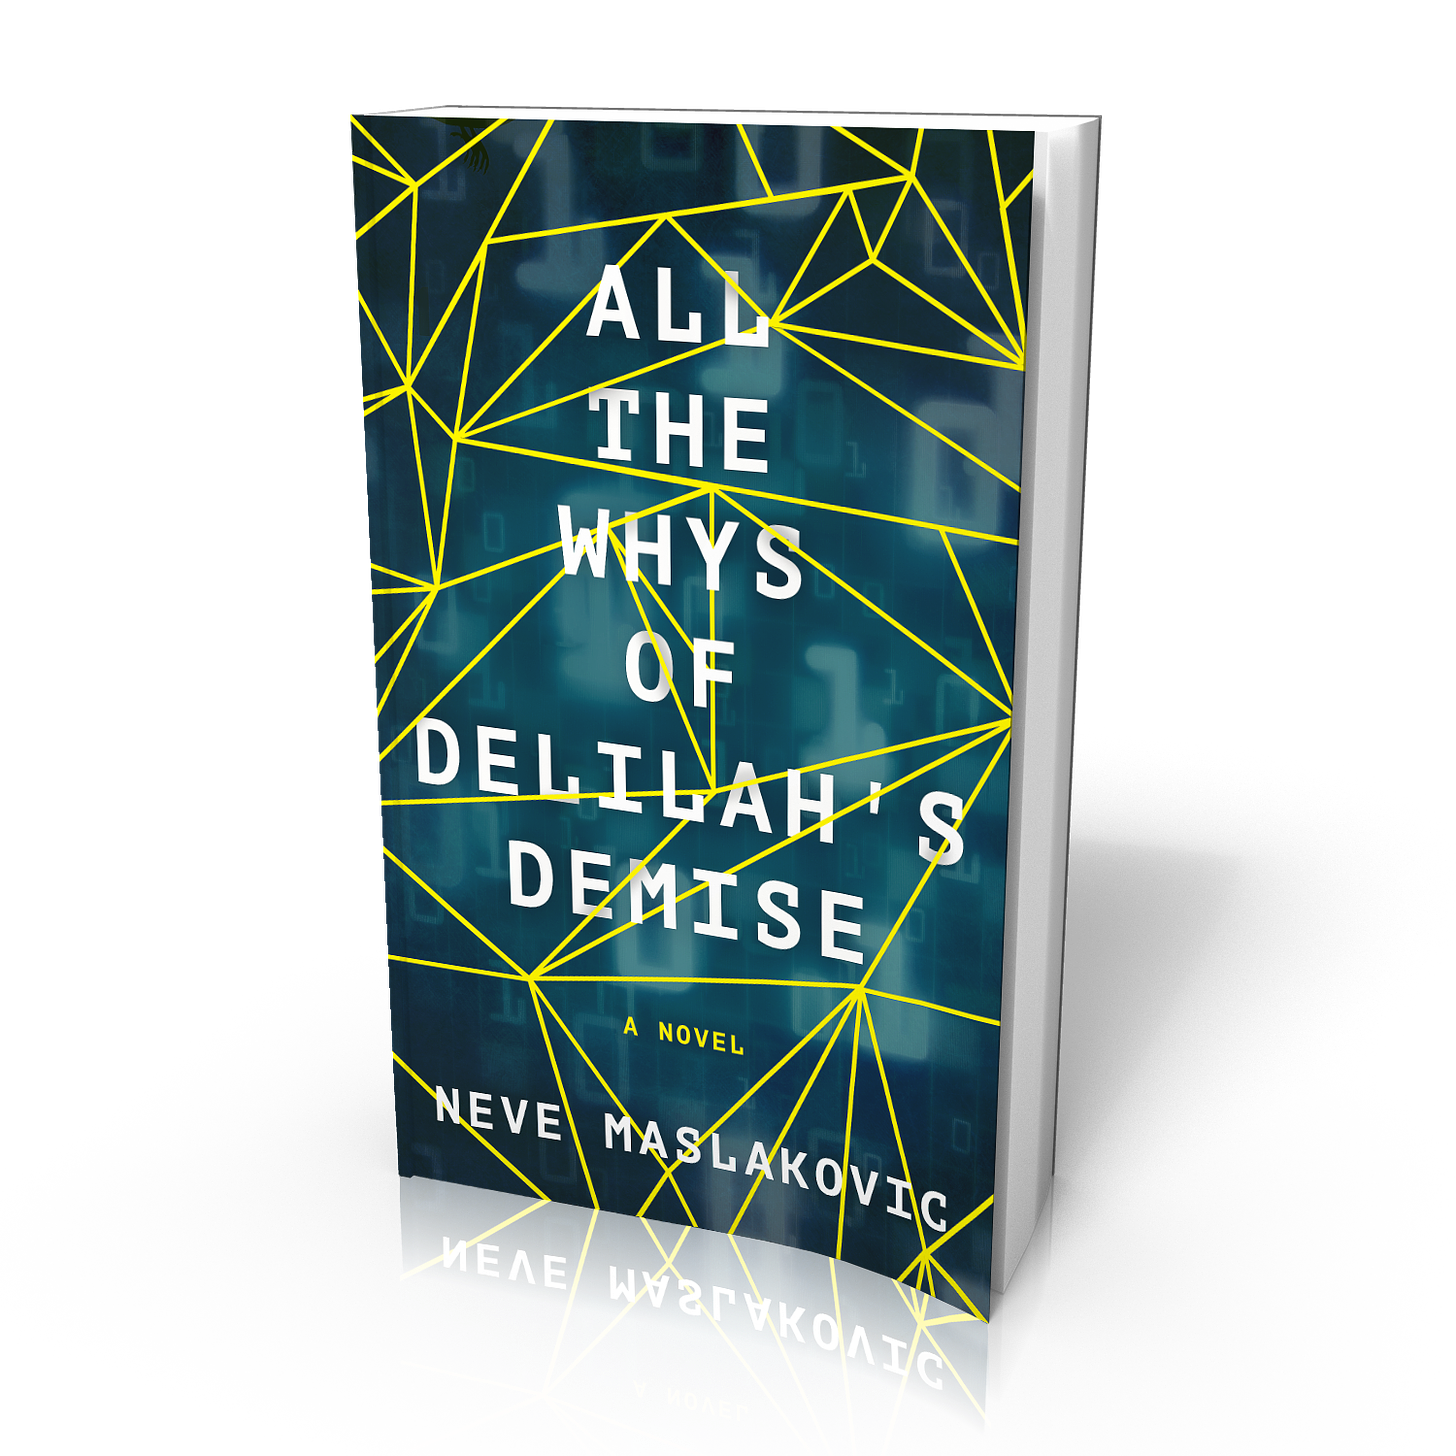 Futuristic looking green cover crisscrossed by yellow lines. The title All the Whys of Dellilah’s Demise is in white.